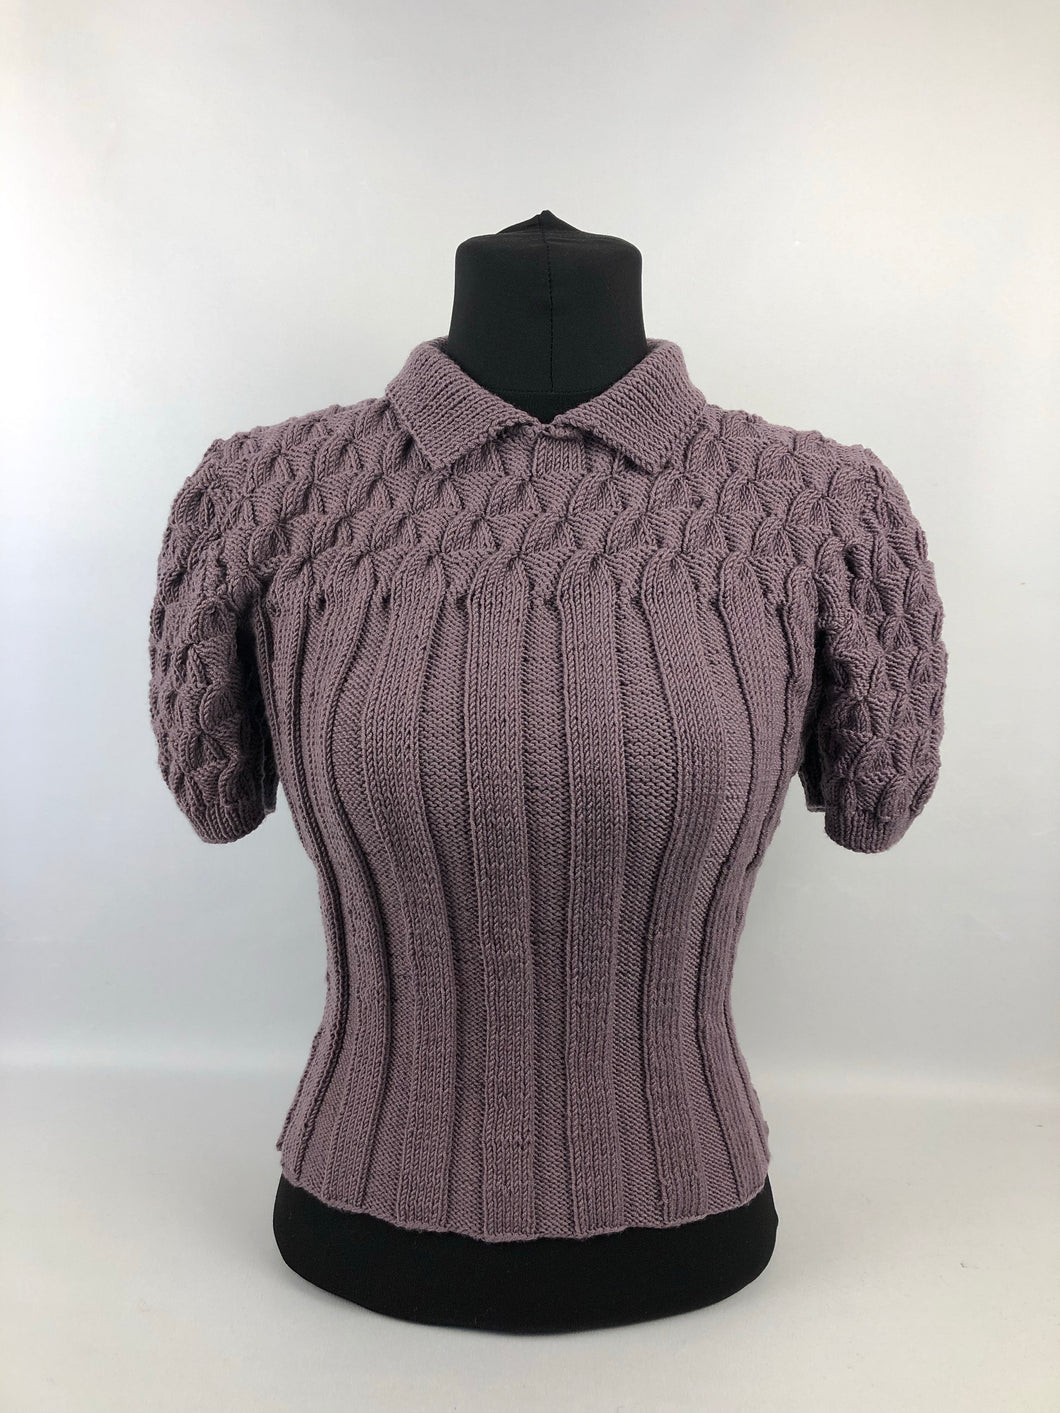 Reproduction 1940s Rib and Cable Knit Jumper in Pure Merino - B34 36 38